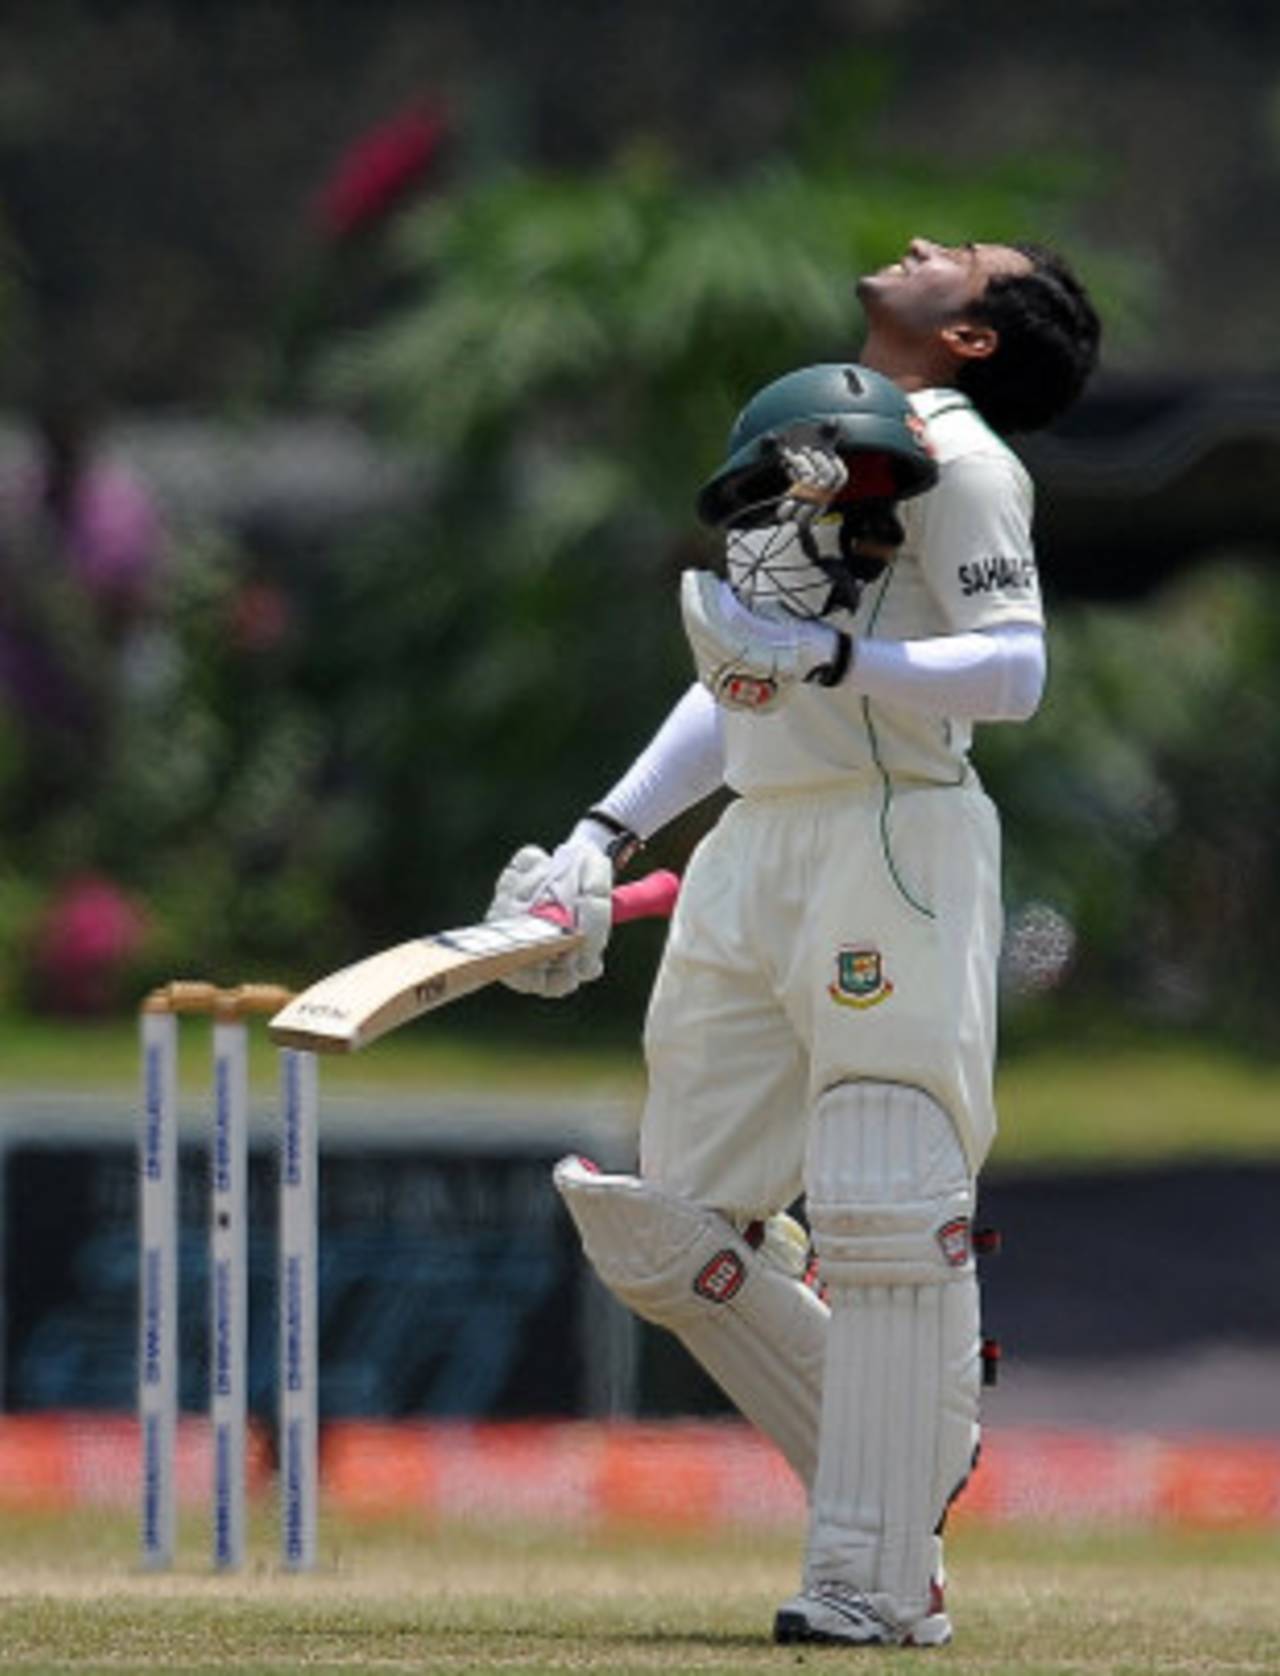 Mushfiqur Rahim is ecstatic after becoming Bangladesh's first double centurion, Sri Lanka v Bangladesh, 1st Test, Galle, 4th day, March 11, 2013